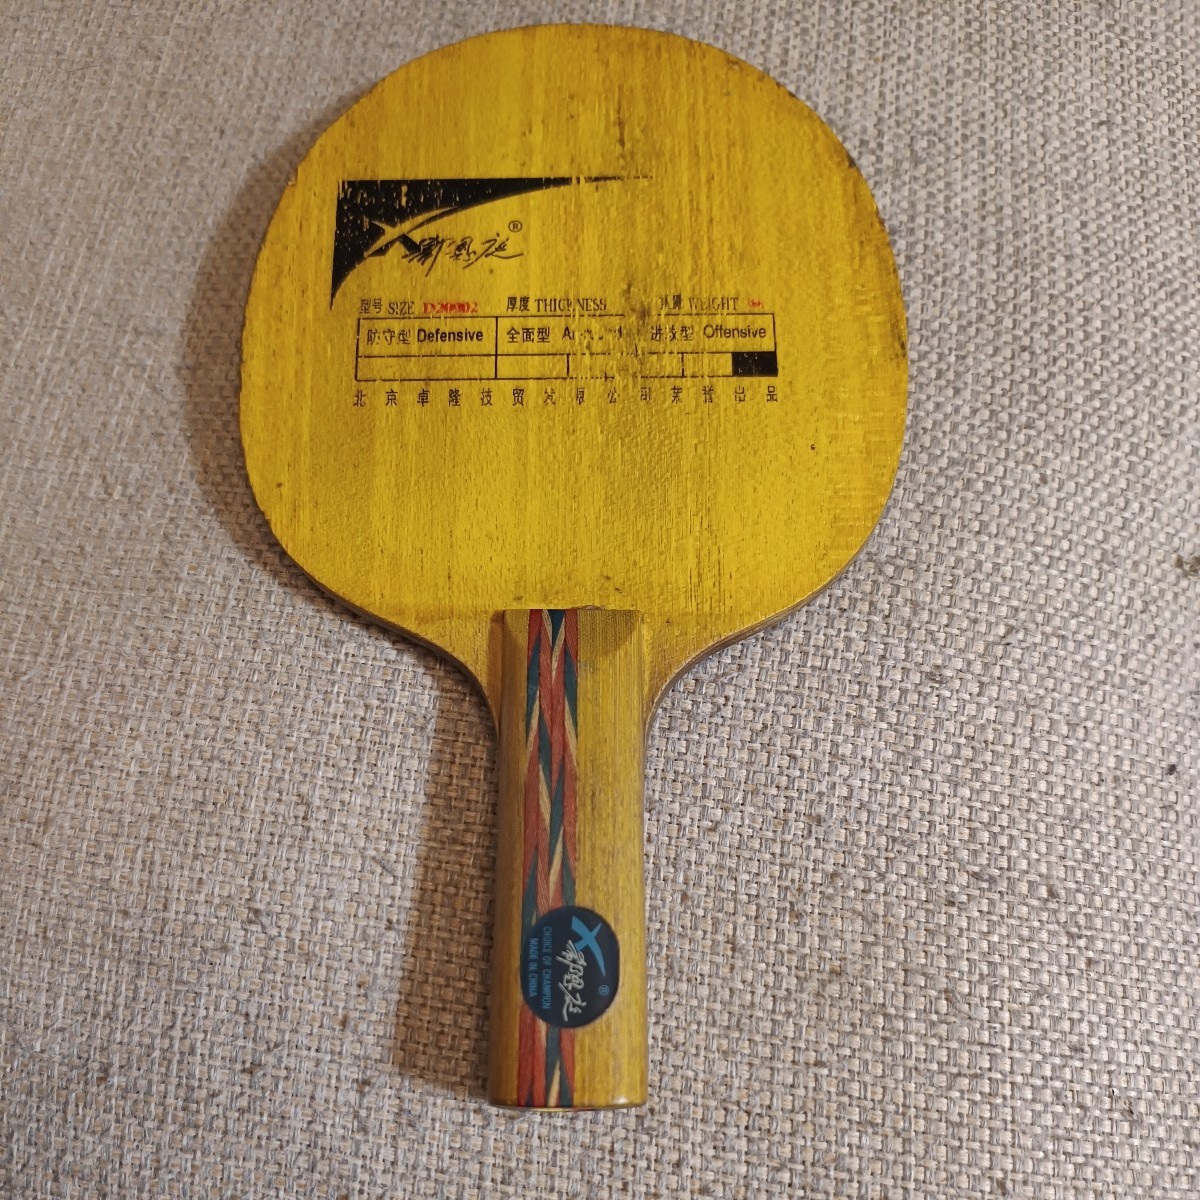  ping-pong racket *. garden model *.. for /Offensive*she-k hand * strut clip /ST* weight :108g*JTTAA none * postage cheap!3cm within possible 